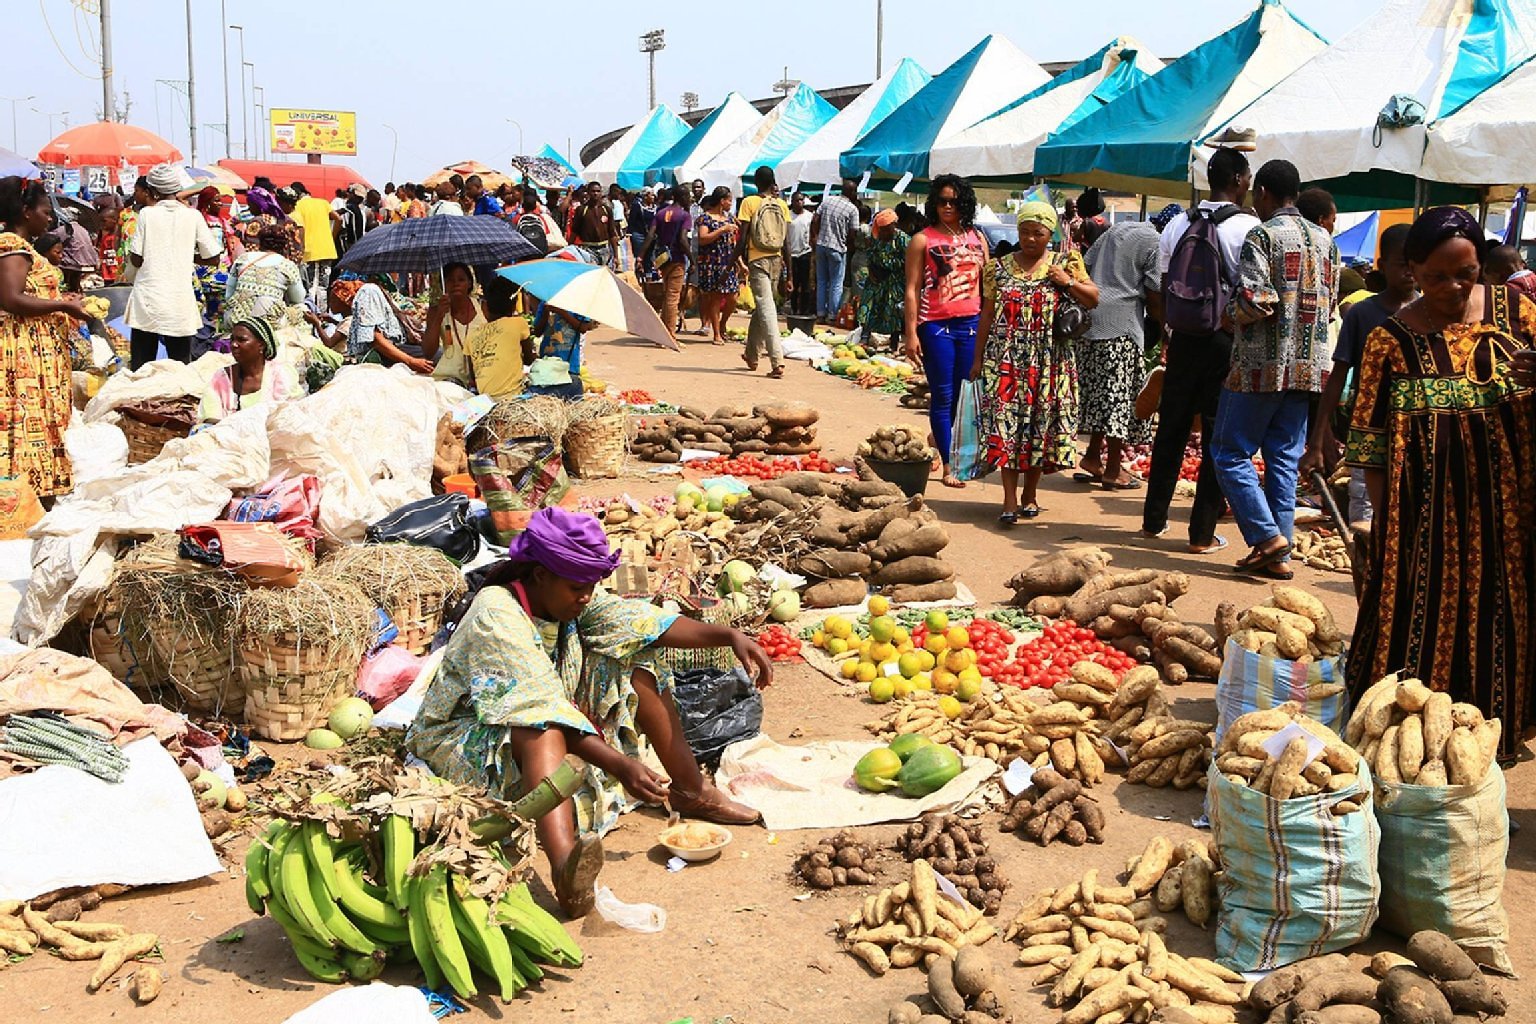 Food and Economy in Cameroon